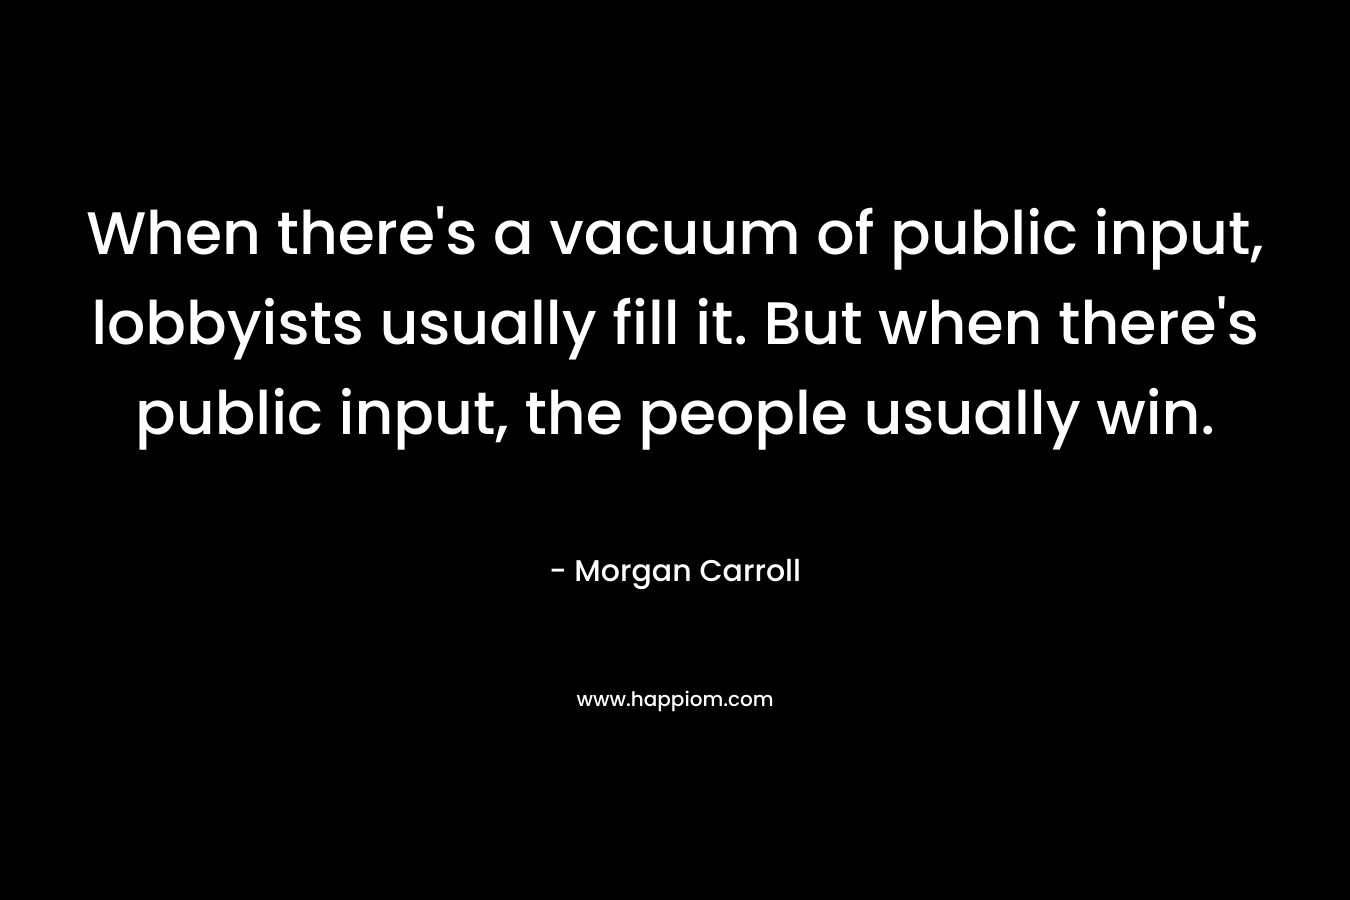 When there's a vacuum of public input, lobbyists usually fill it. But when there's public input, the people usually win.